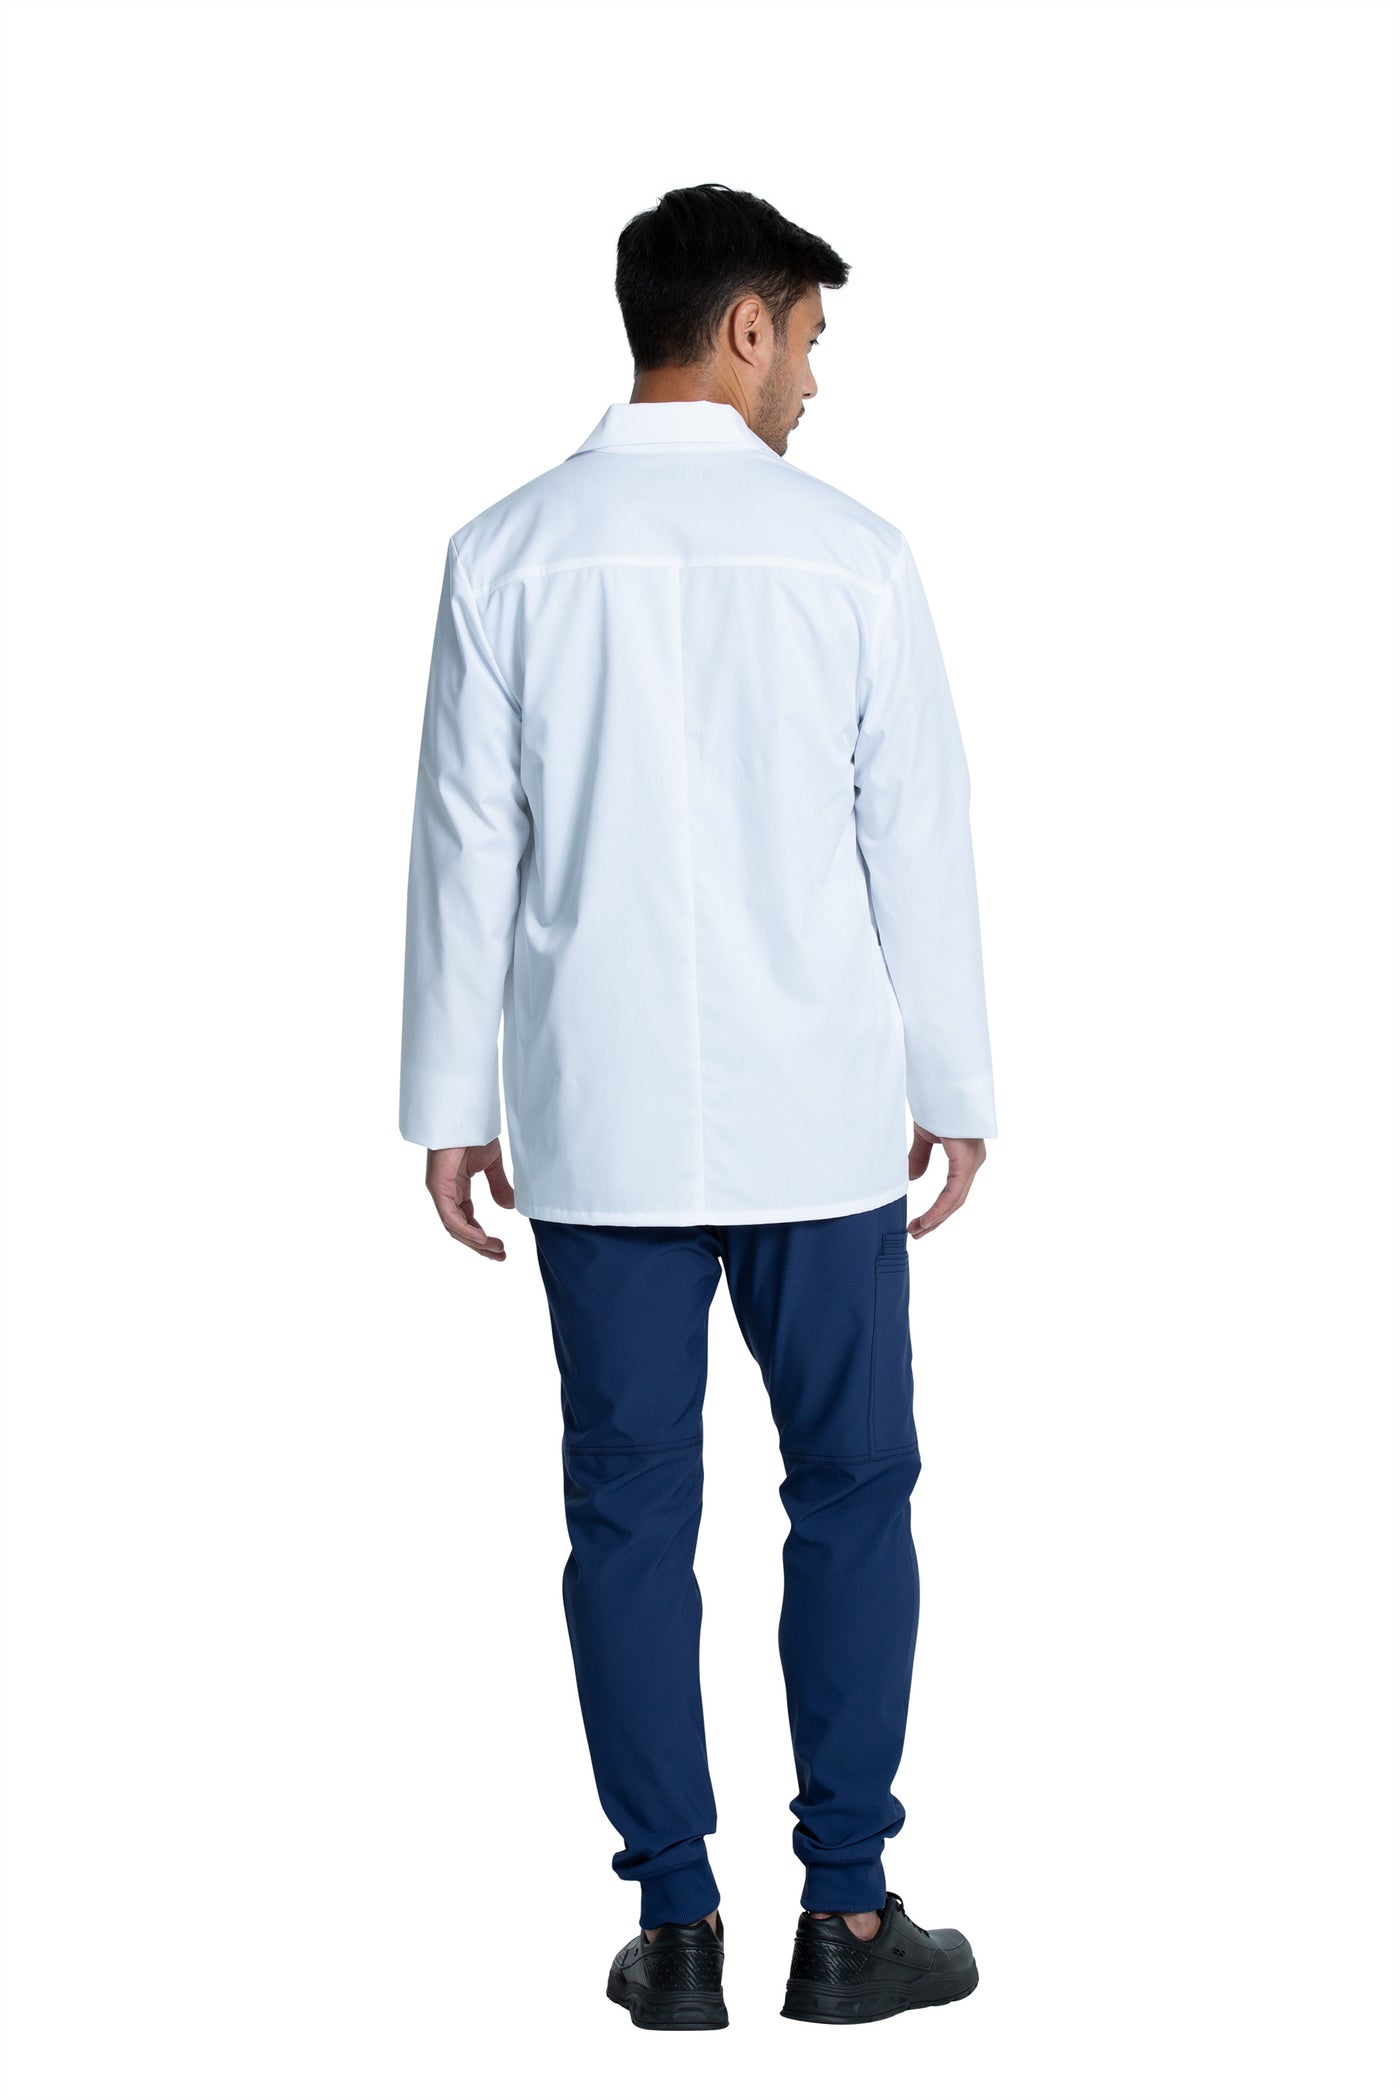 White - Project Lab by Cherokee 30" Men's Consultation Coat